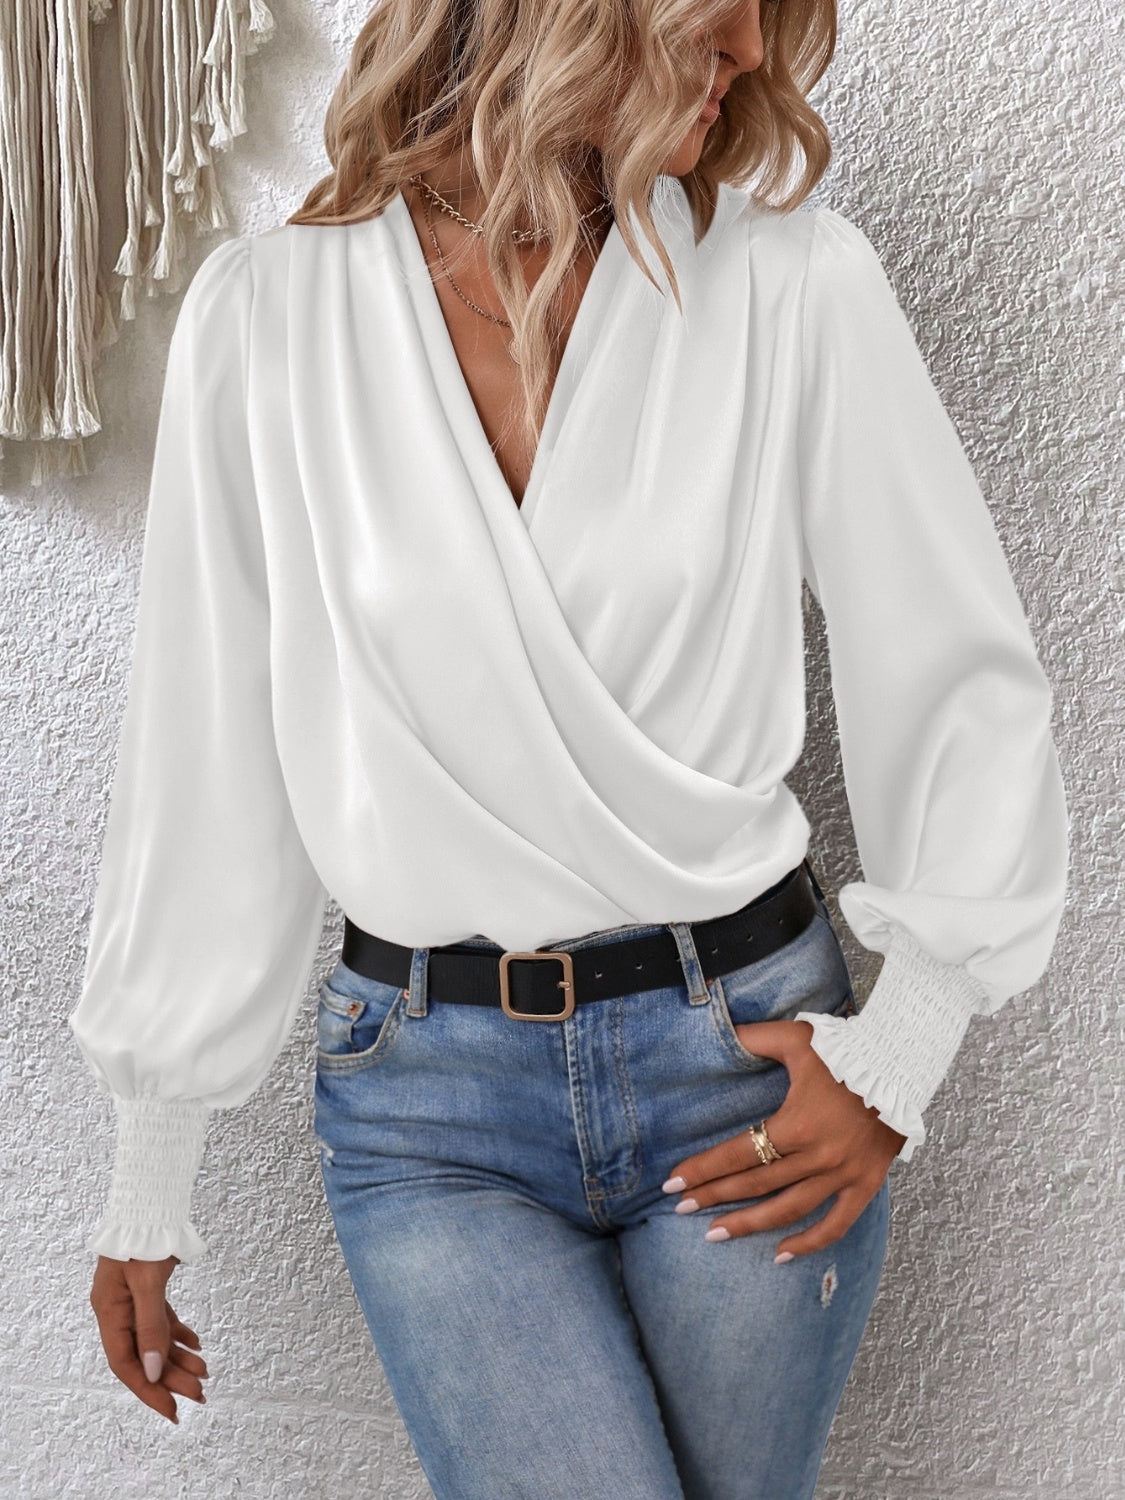 Surplice Smocked Lantern Sleeve Blouse - Women’s Clothing & Accessories - Shirts & Tops - 6 - 2024